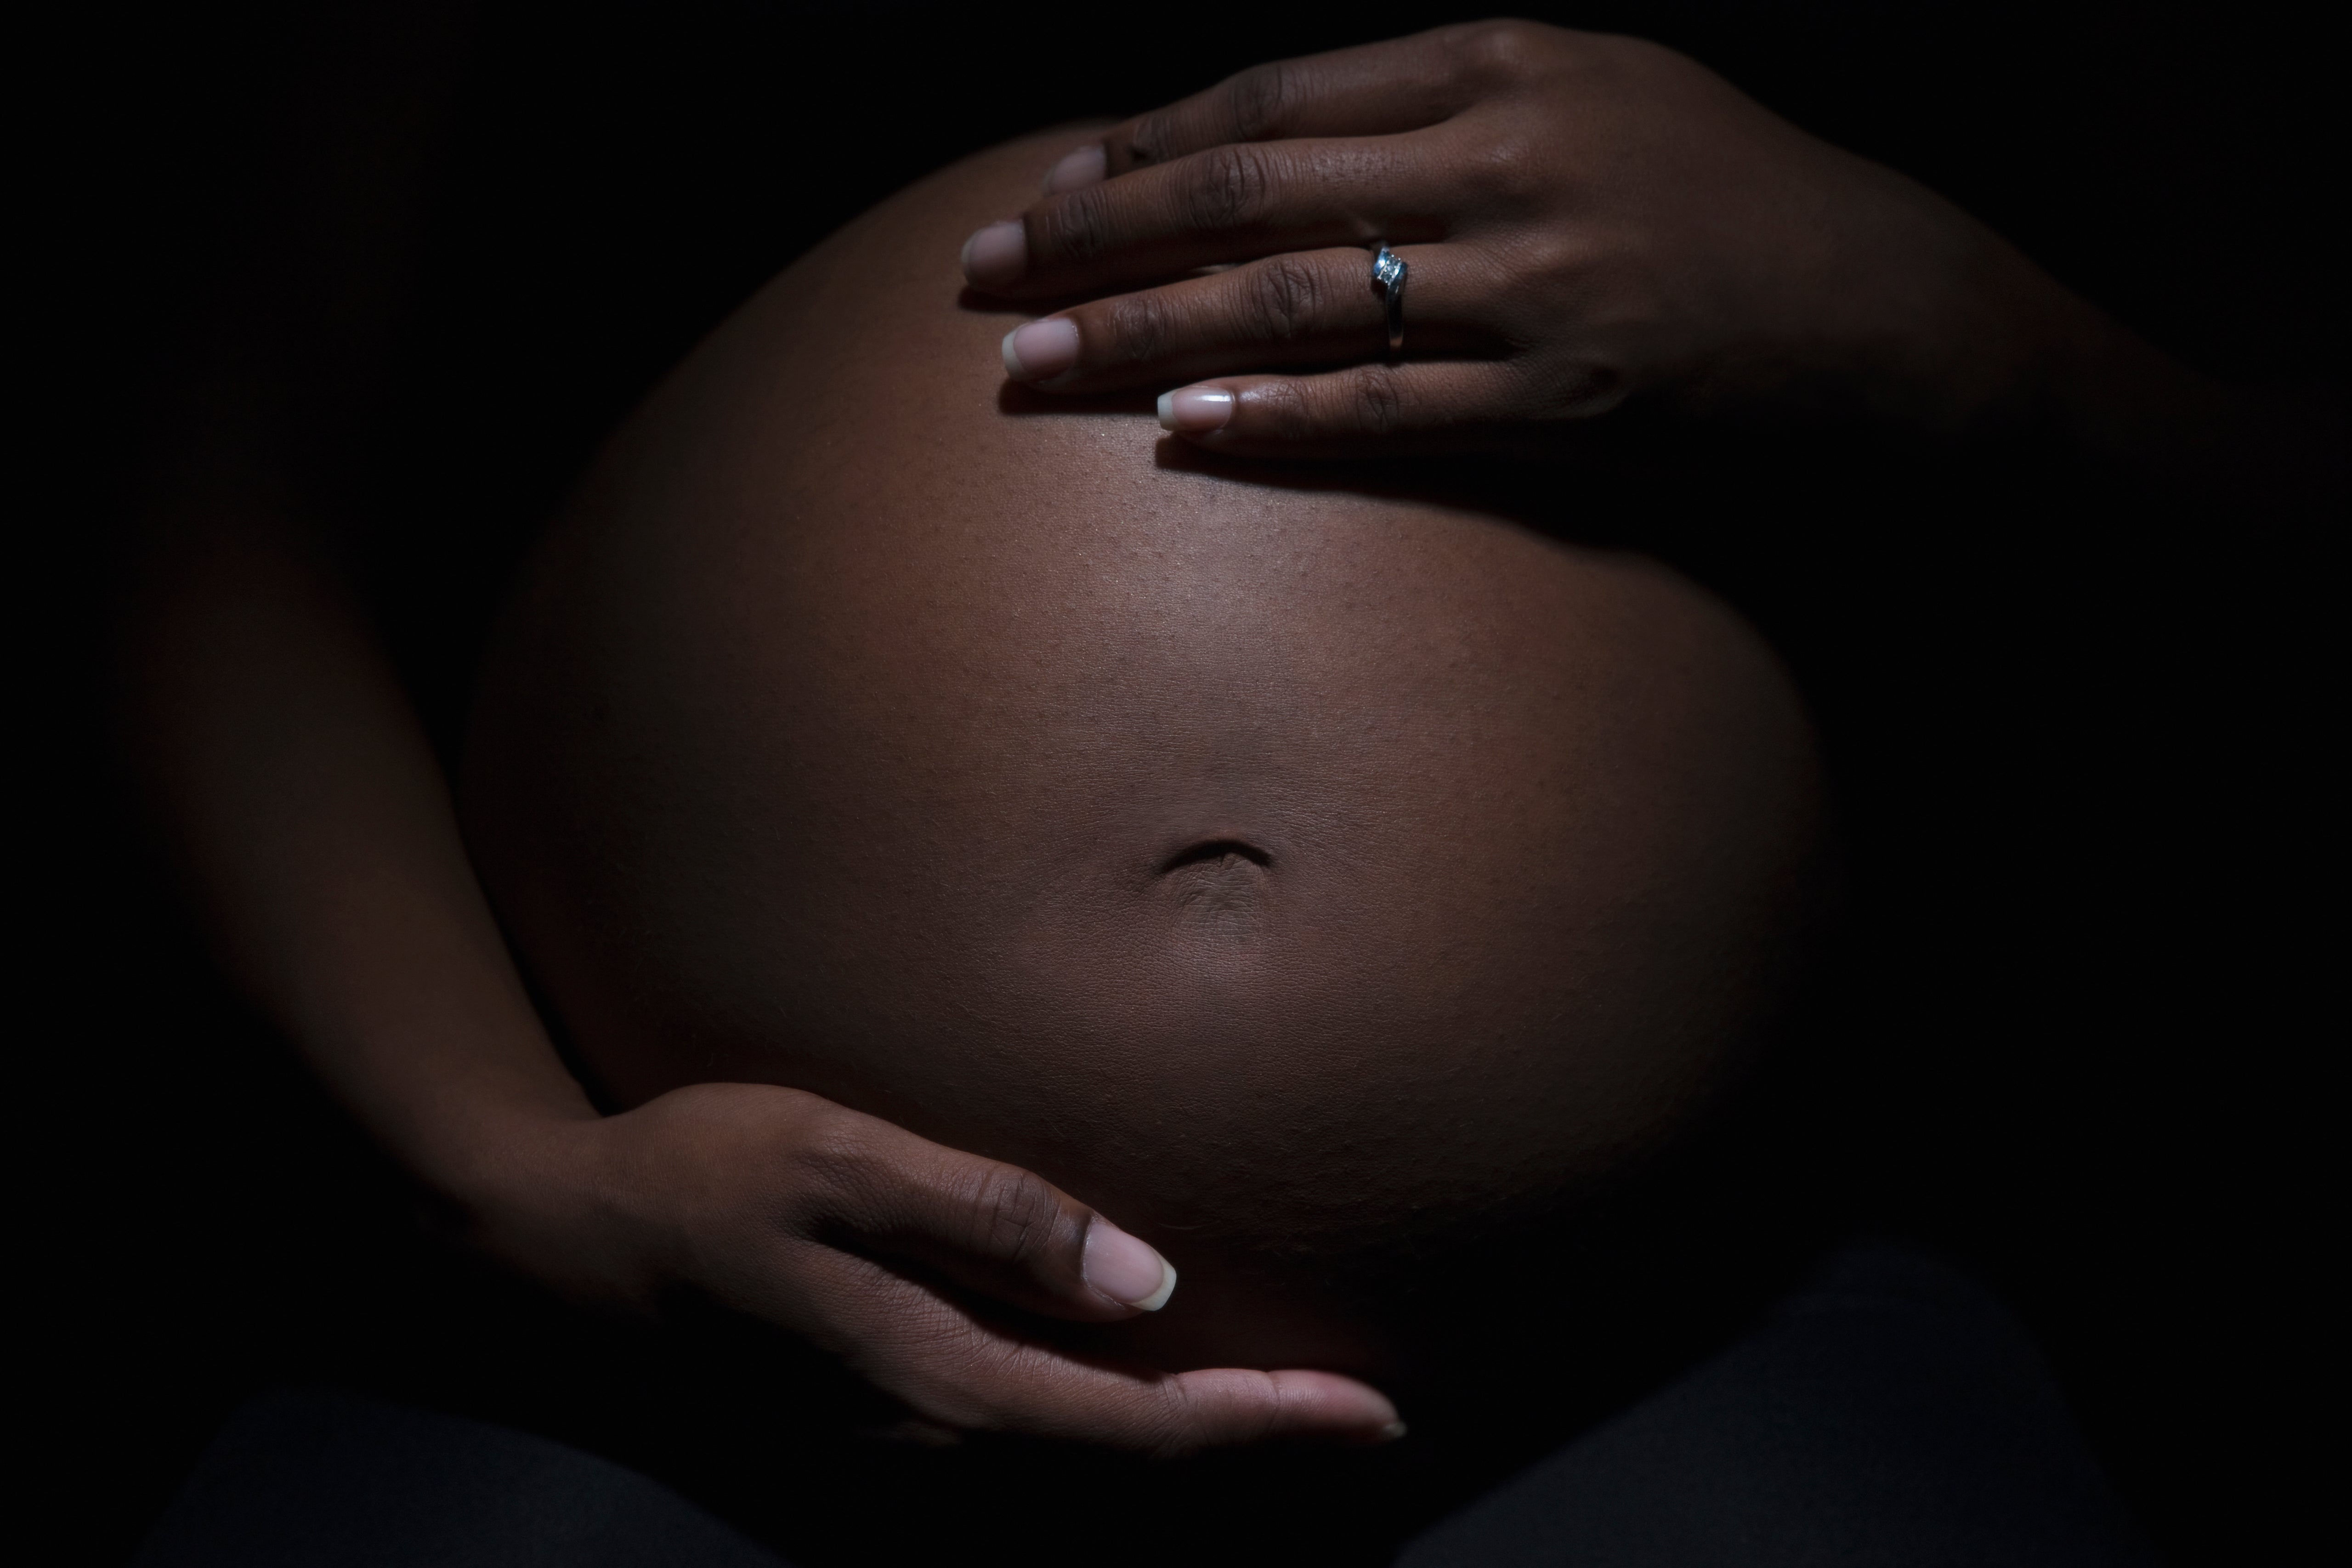 African Women Ostracized While Facing Infertility Share Their Heartbreaking Stories
